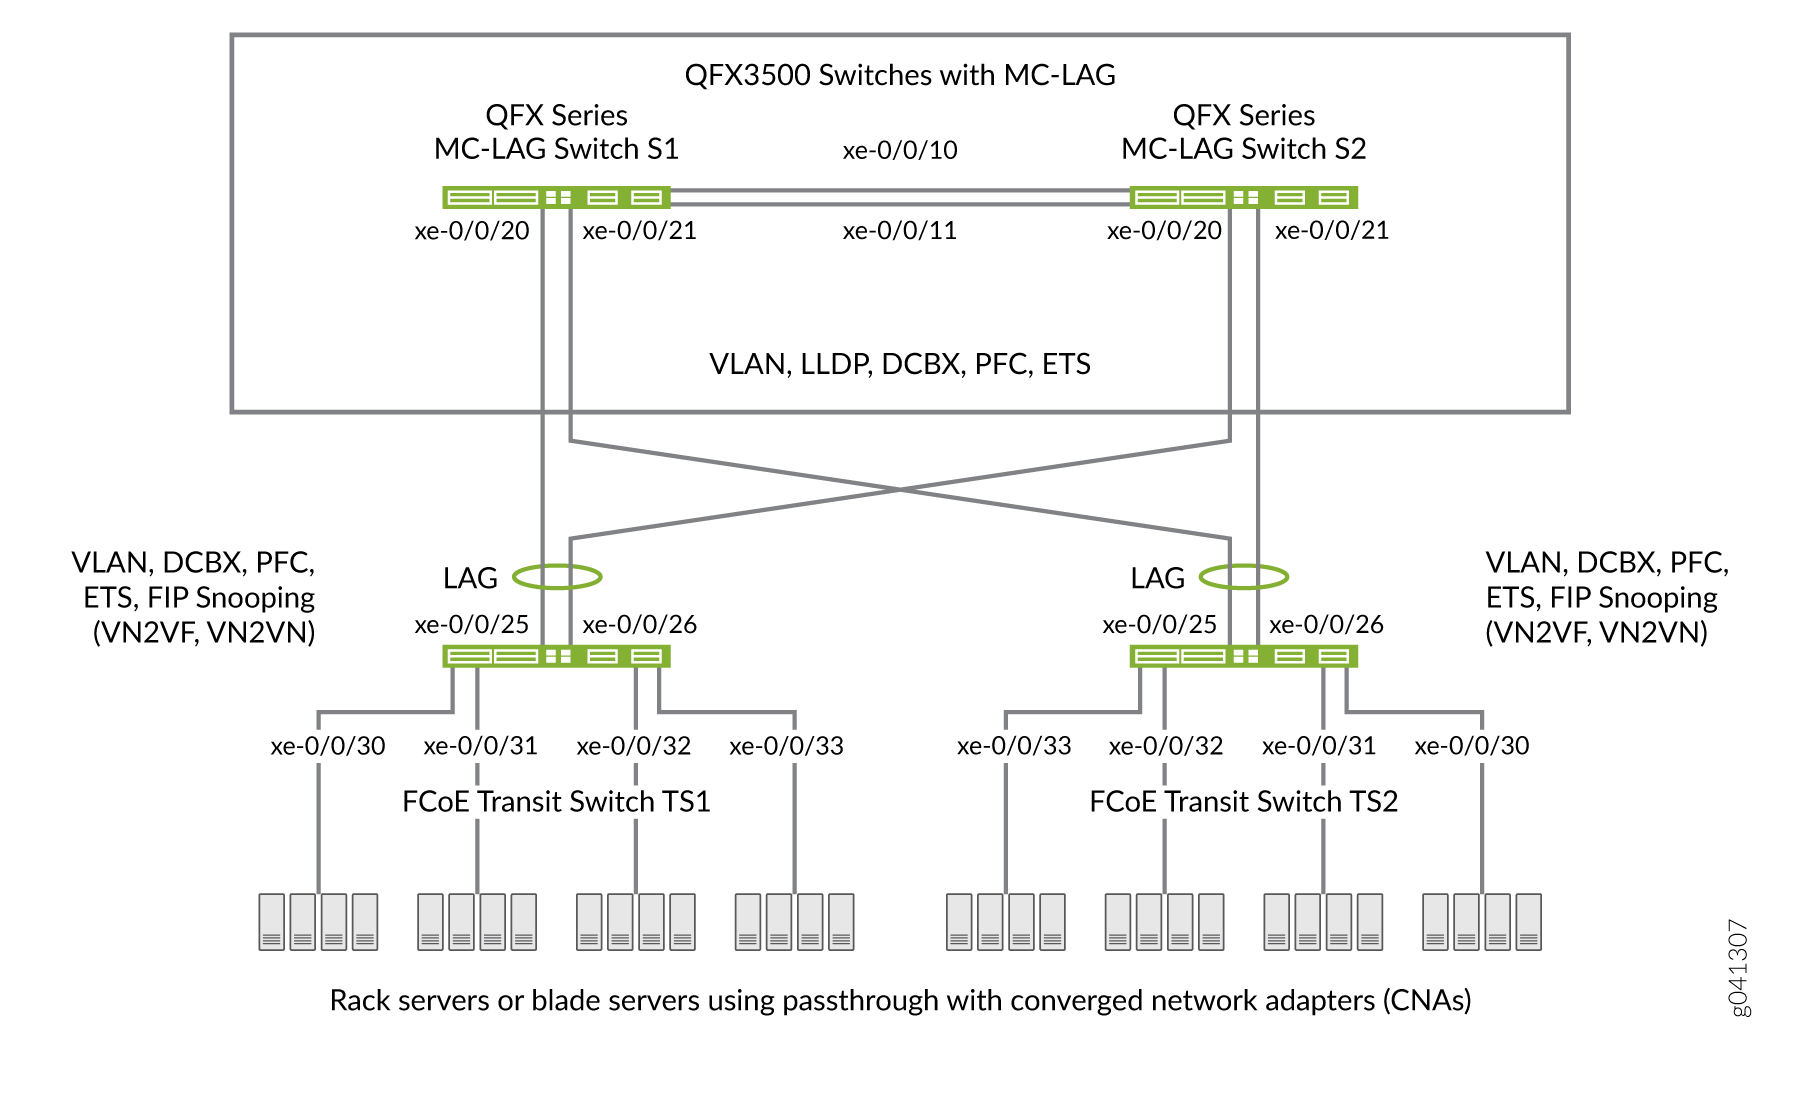 Supported Topology for an MC-LAG on an FCoE Transit Switch